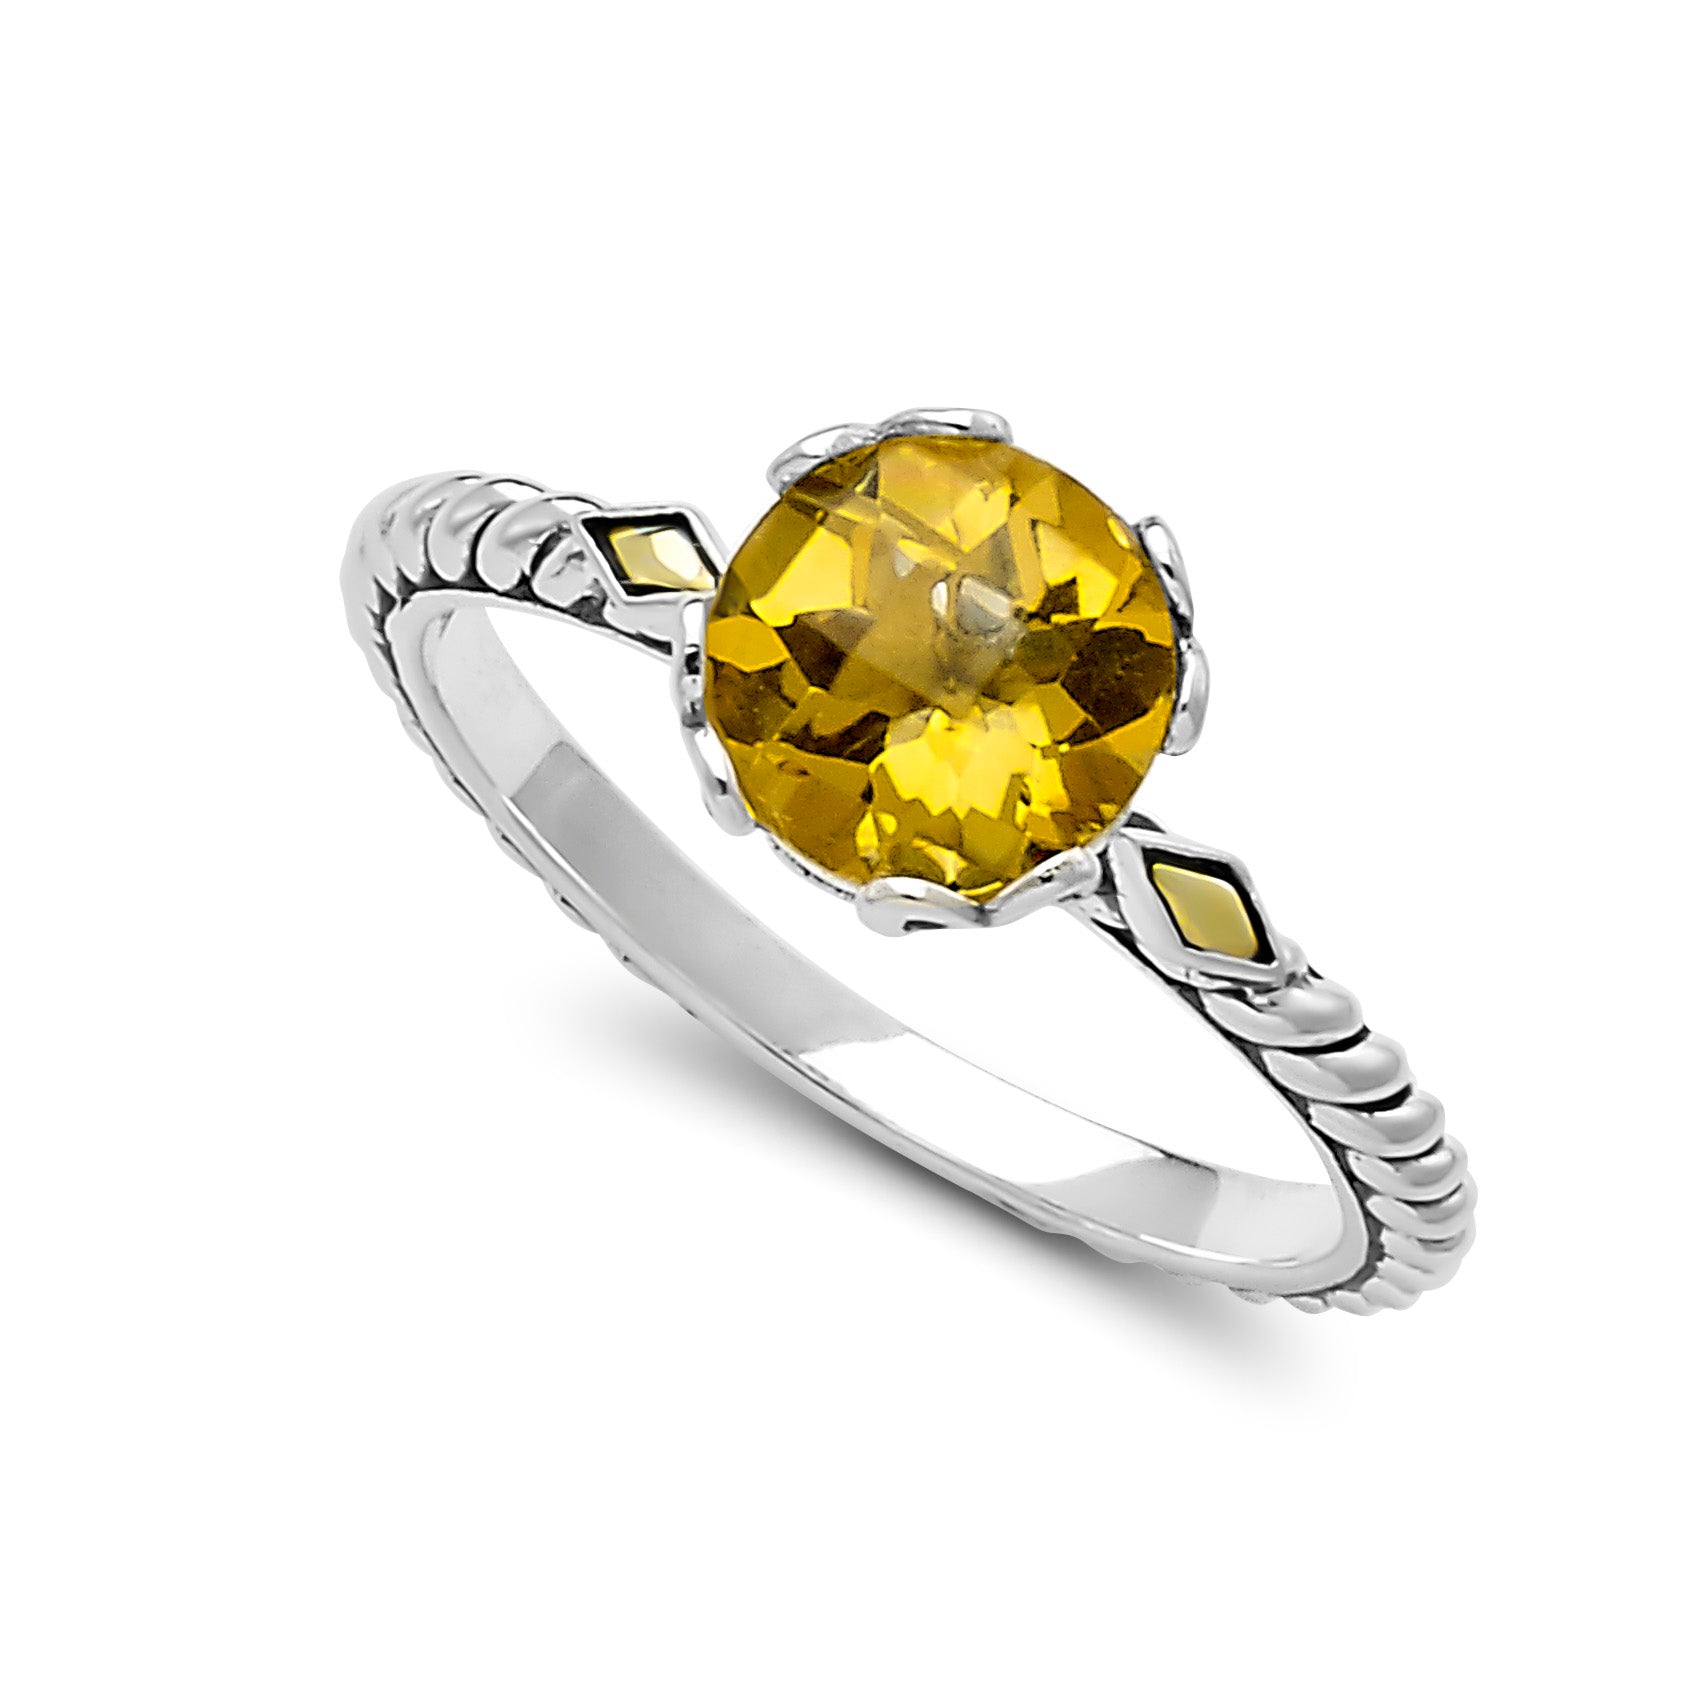 Sterling Silver And 18K Yellow Gold Citrine Ring